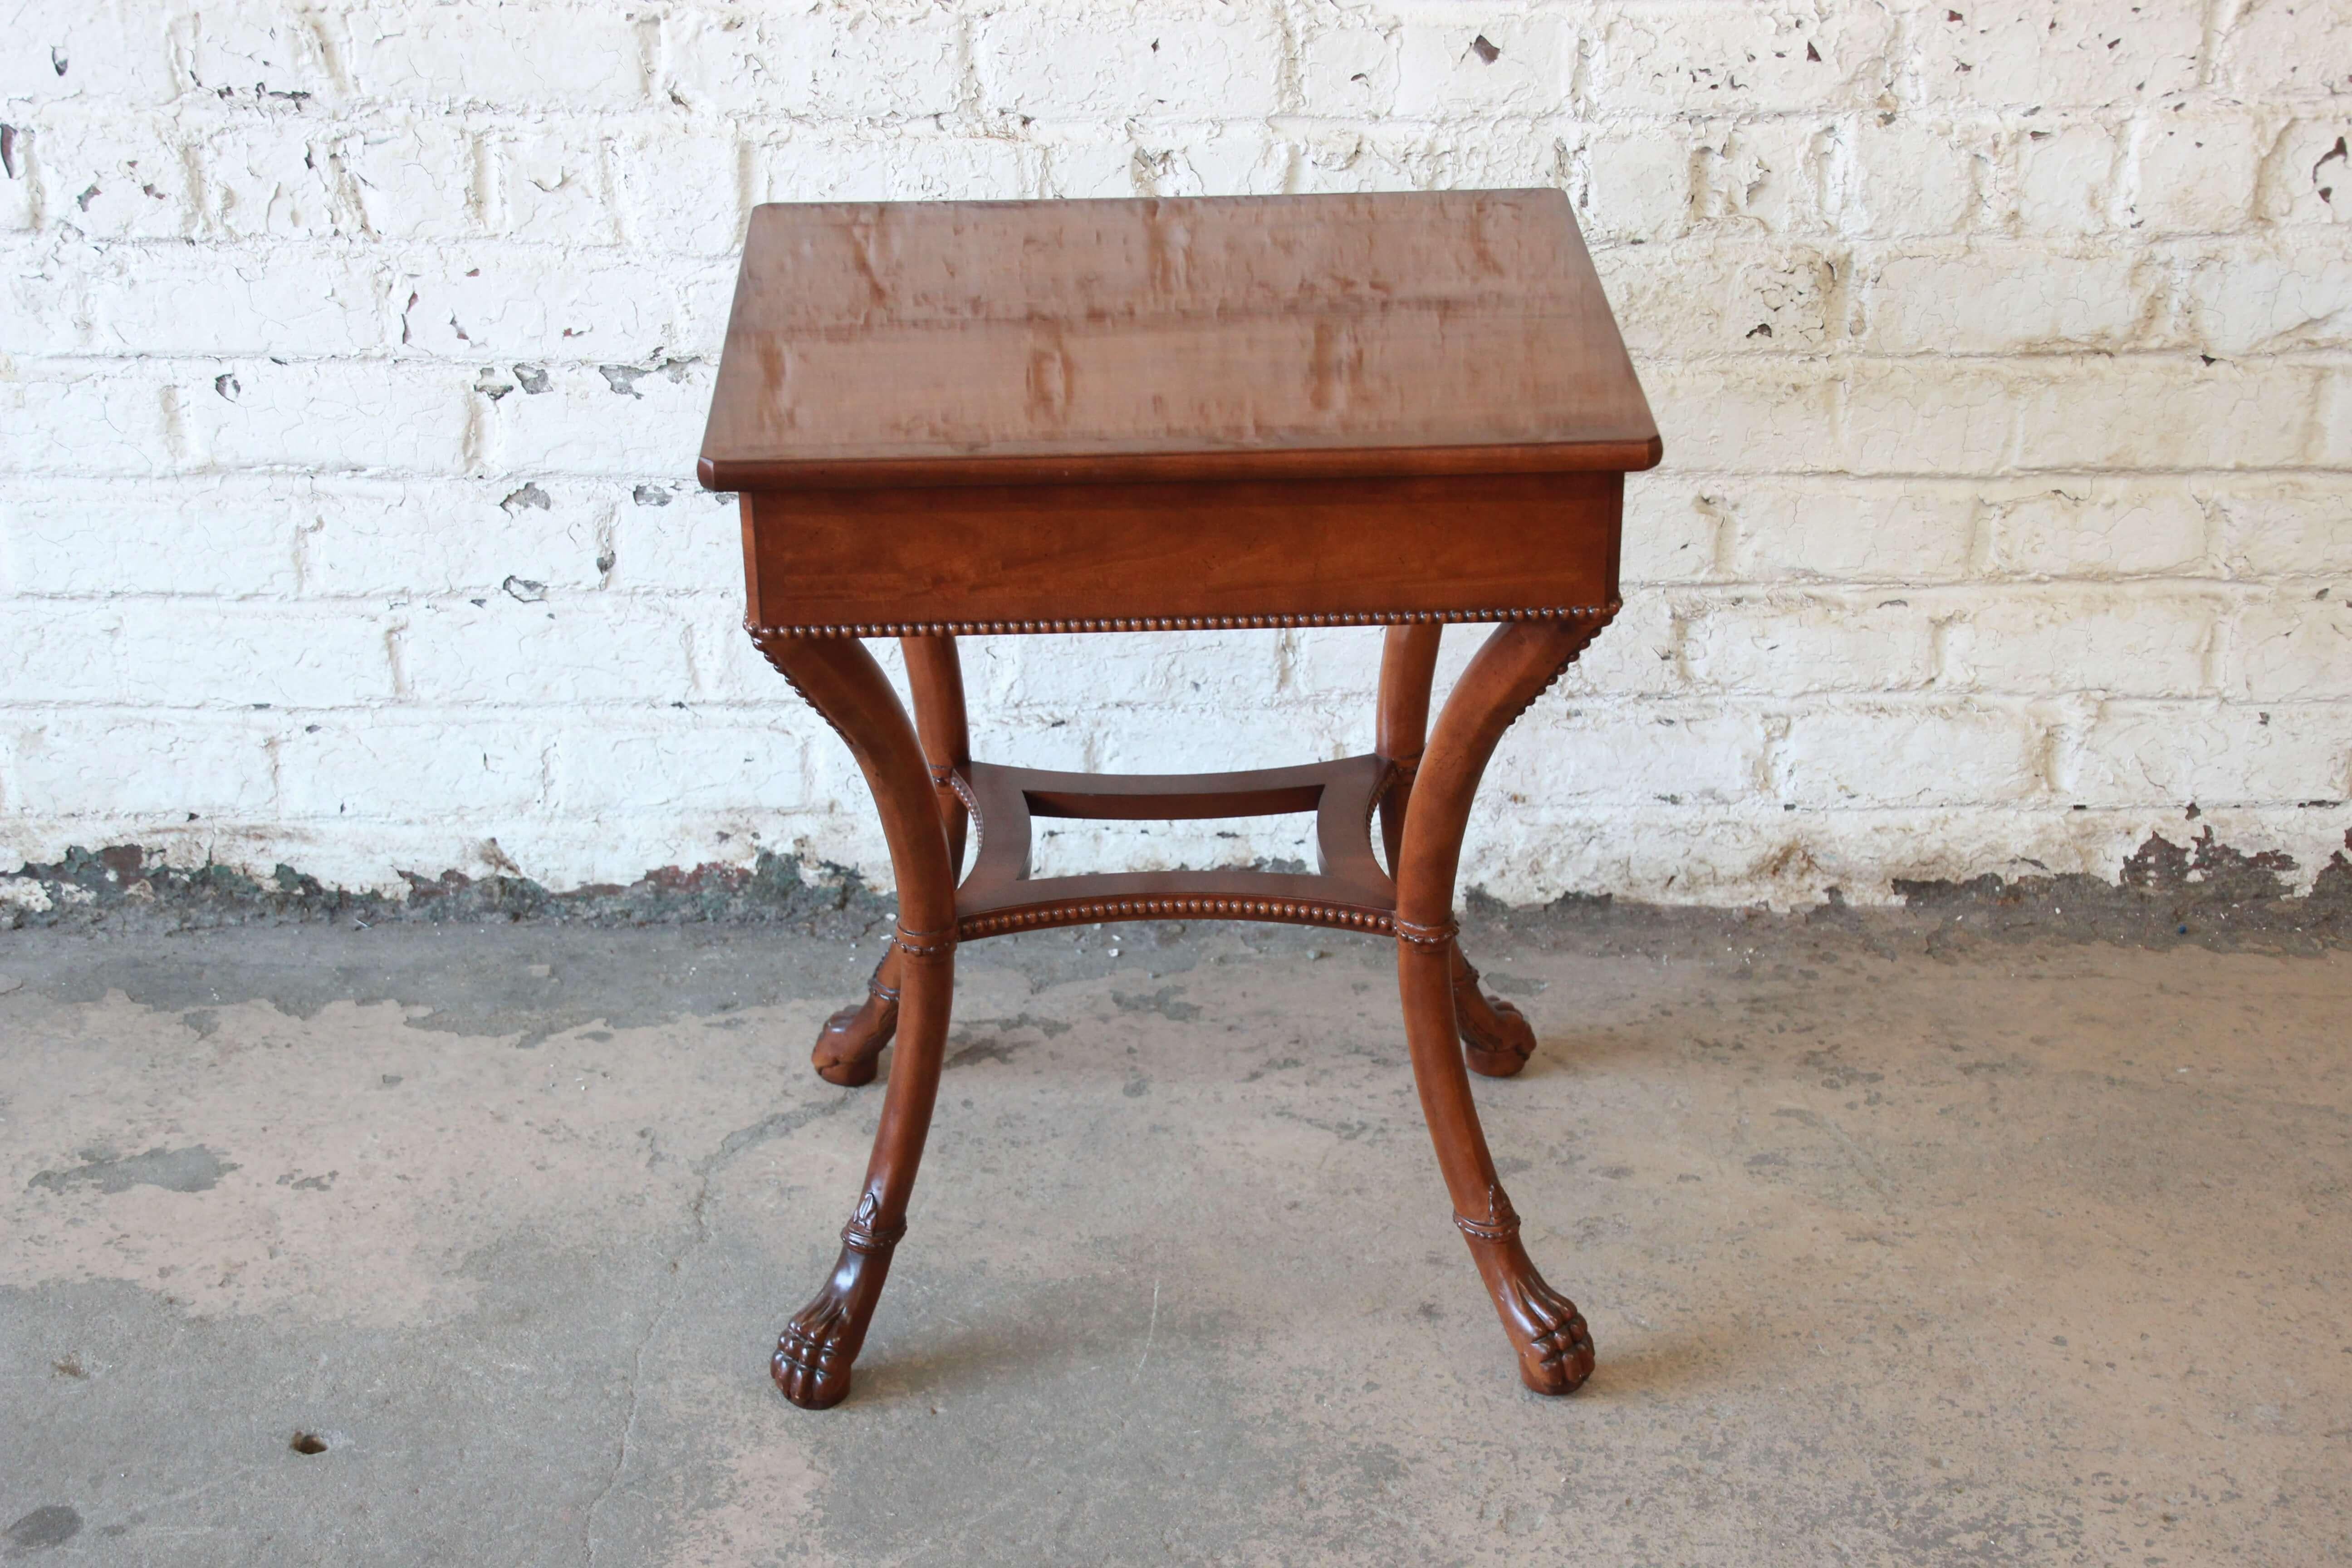 Offering a beautiful Baker Furniture Stately Homes mahogany side table. The table has very nice details with claw feet. It offers carved details throughout the piece with a nice lacquer mahogany finish on top. The table is in great original vintage